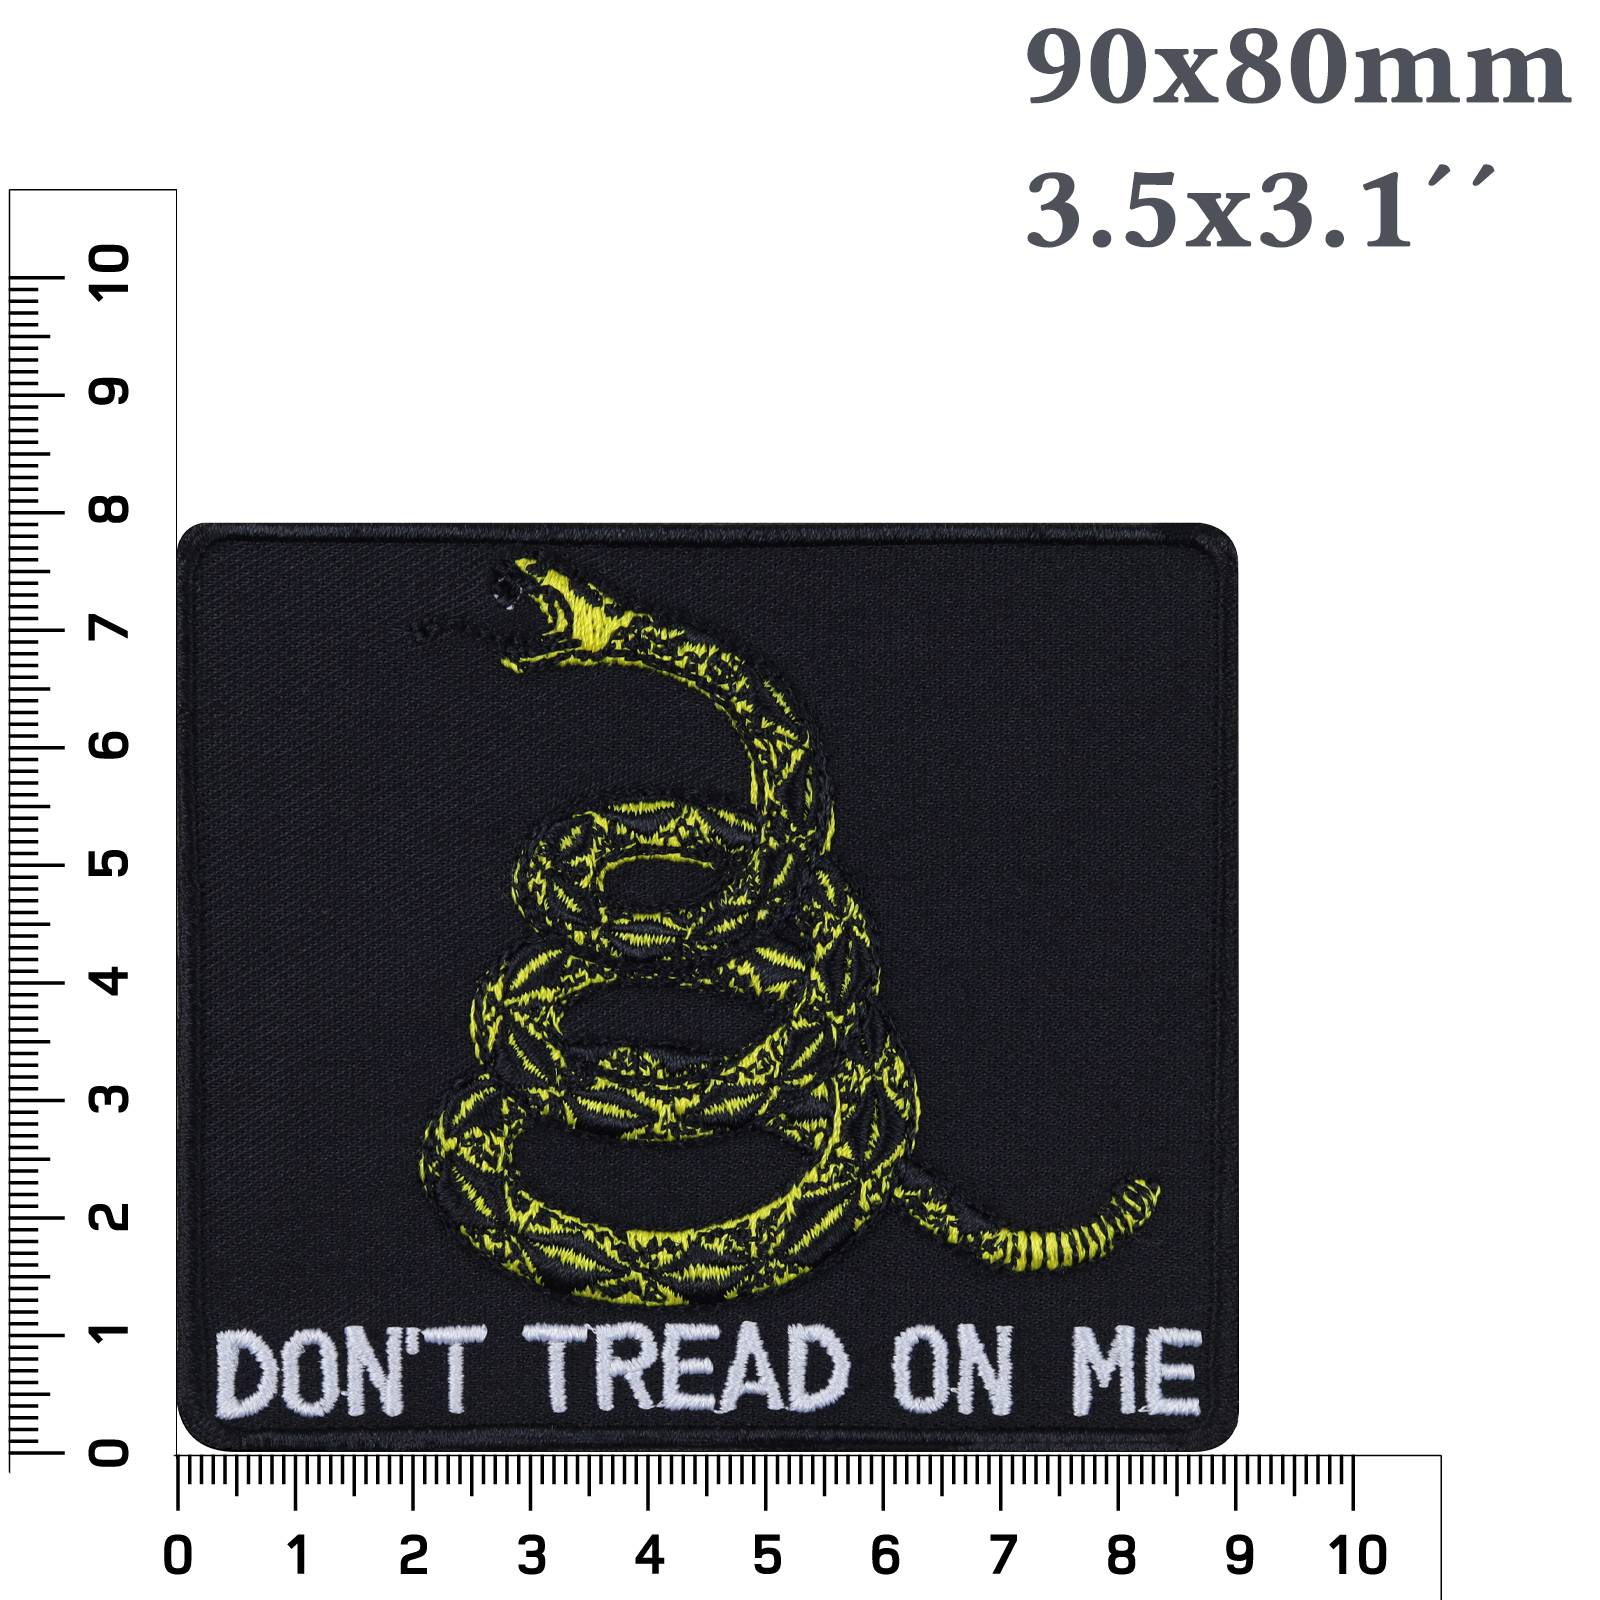 Don't tread on me - Patch